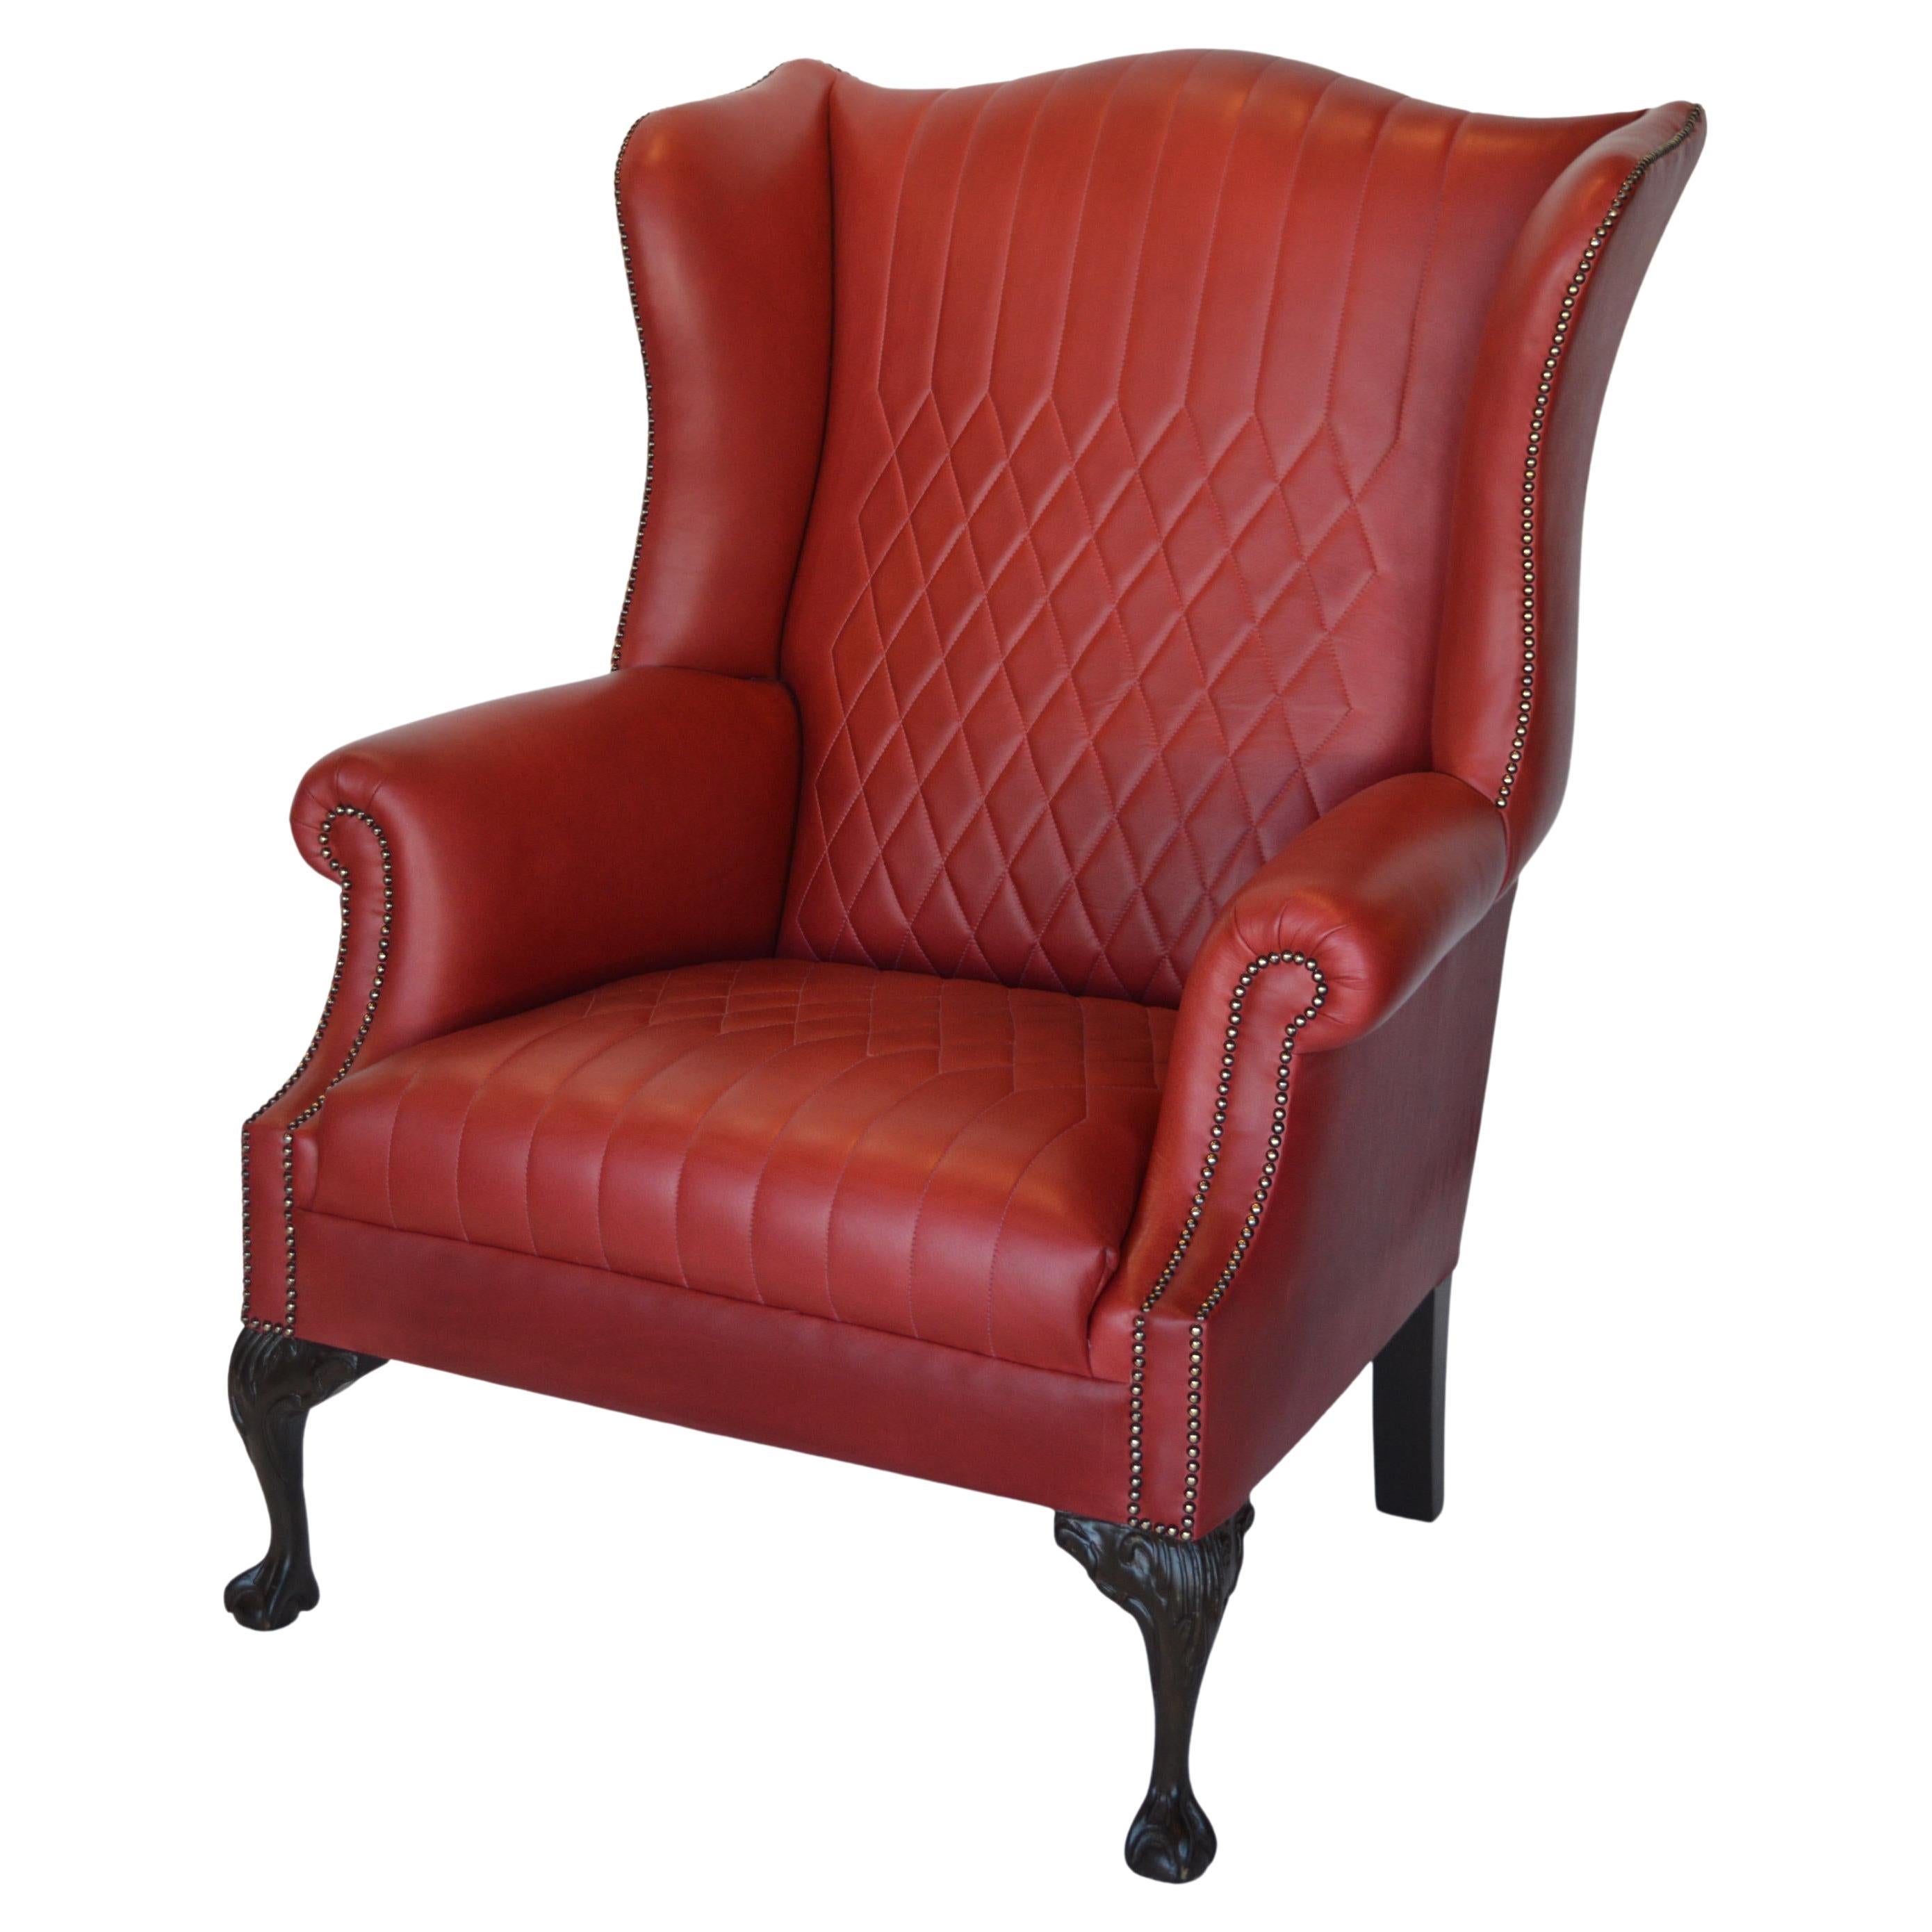 Late 19th Century, English Wingback Leather Chair For Sale